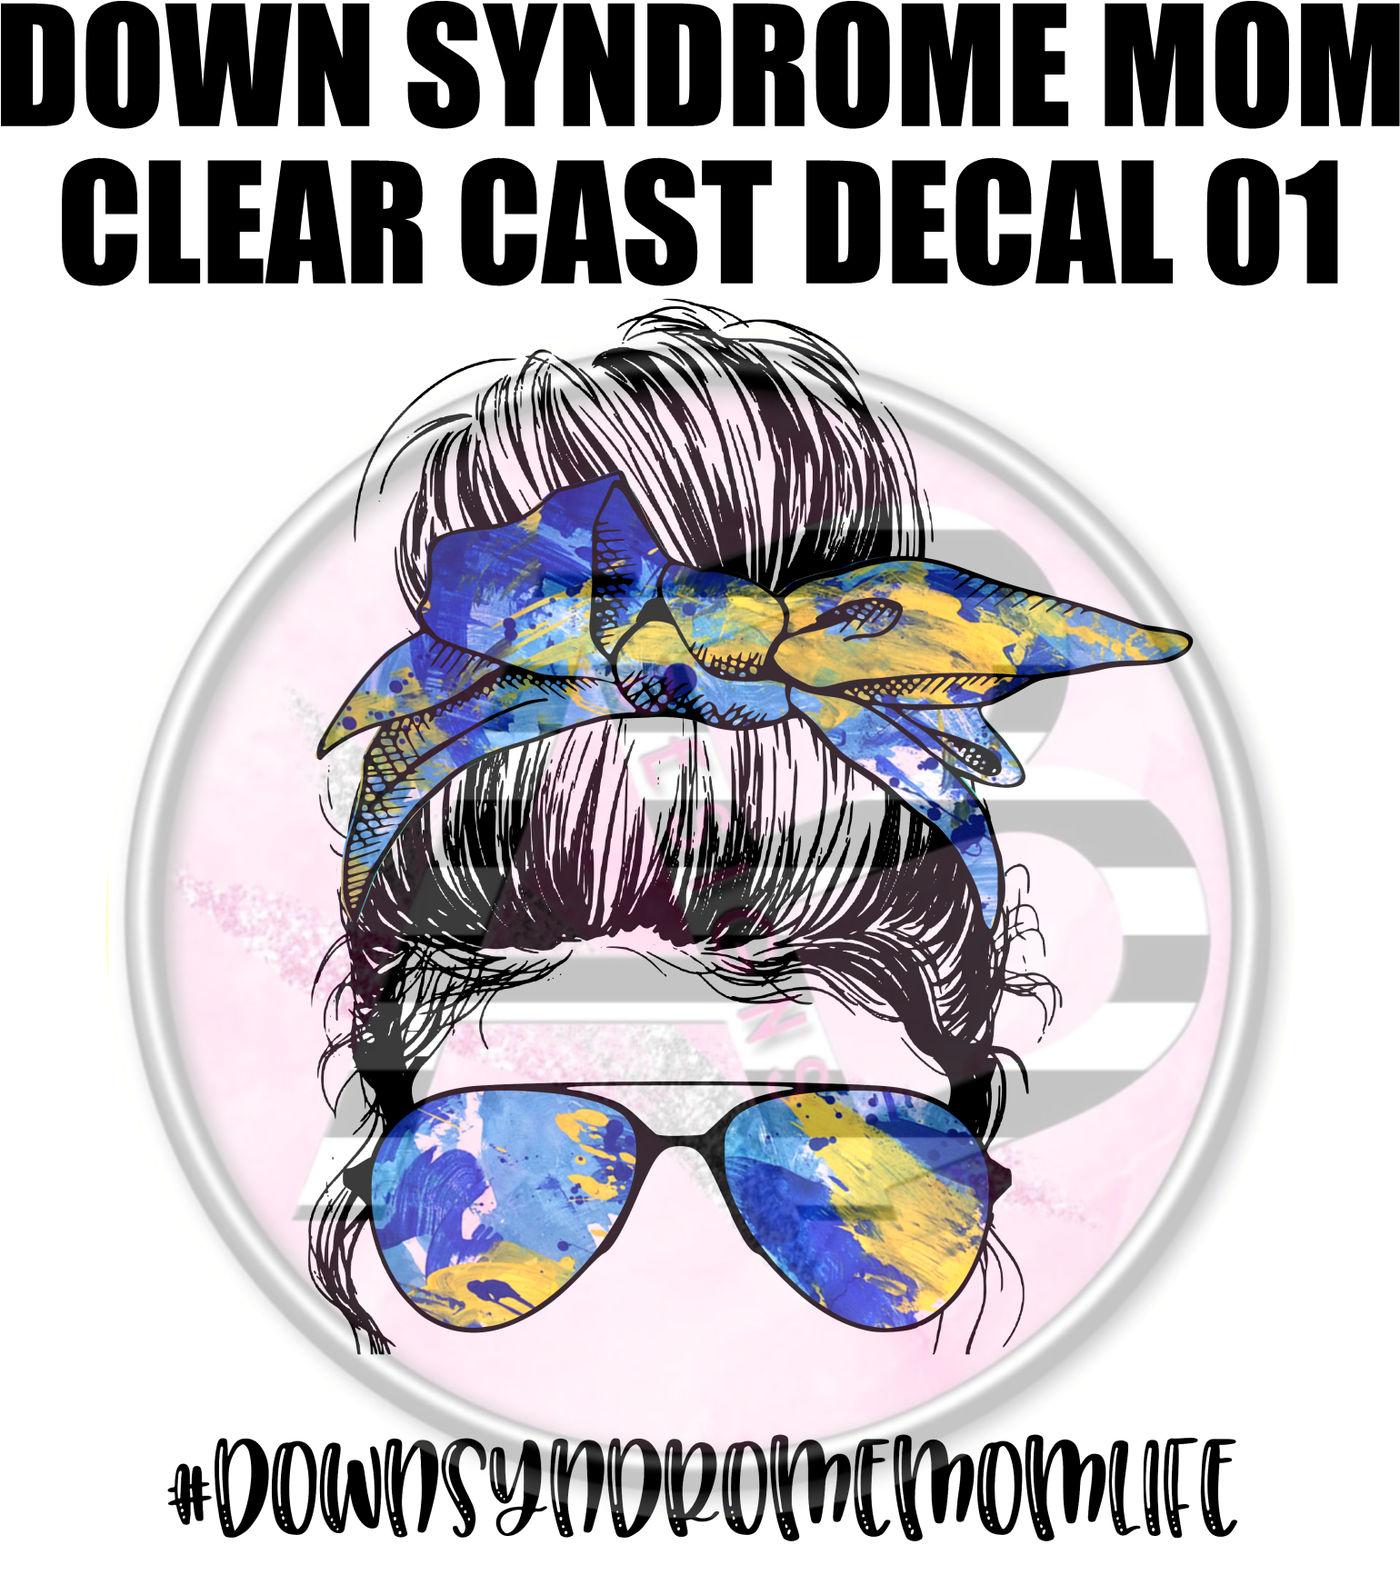 Down Syndrome Mom 01 - Clear Cast Decal